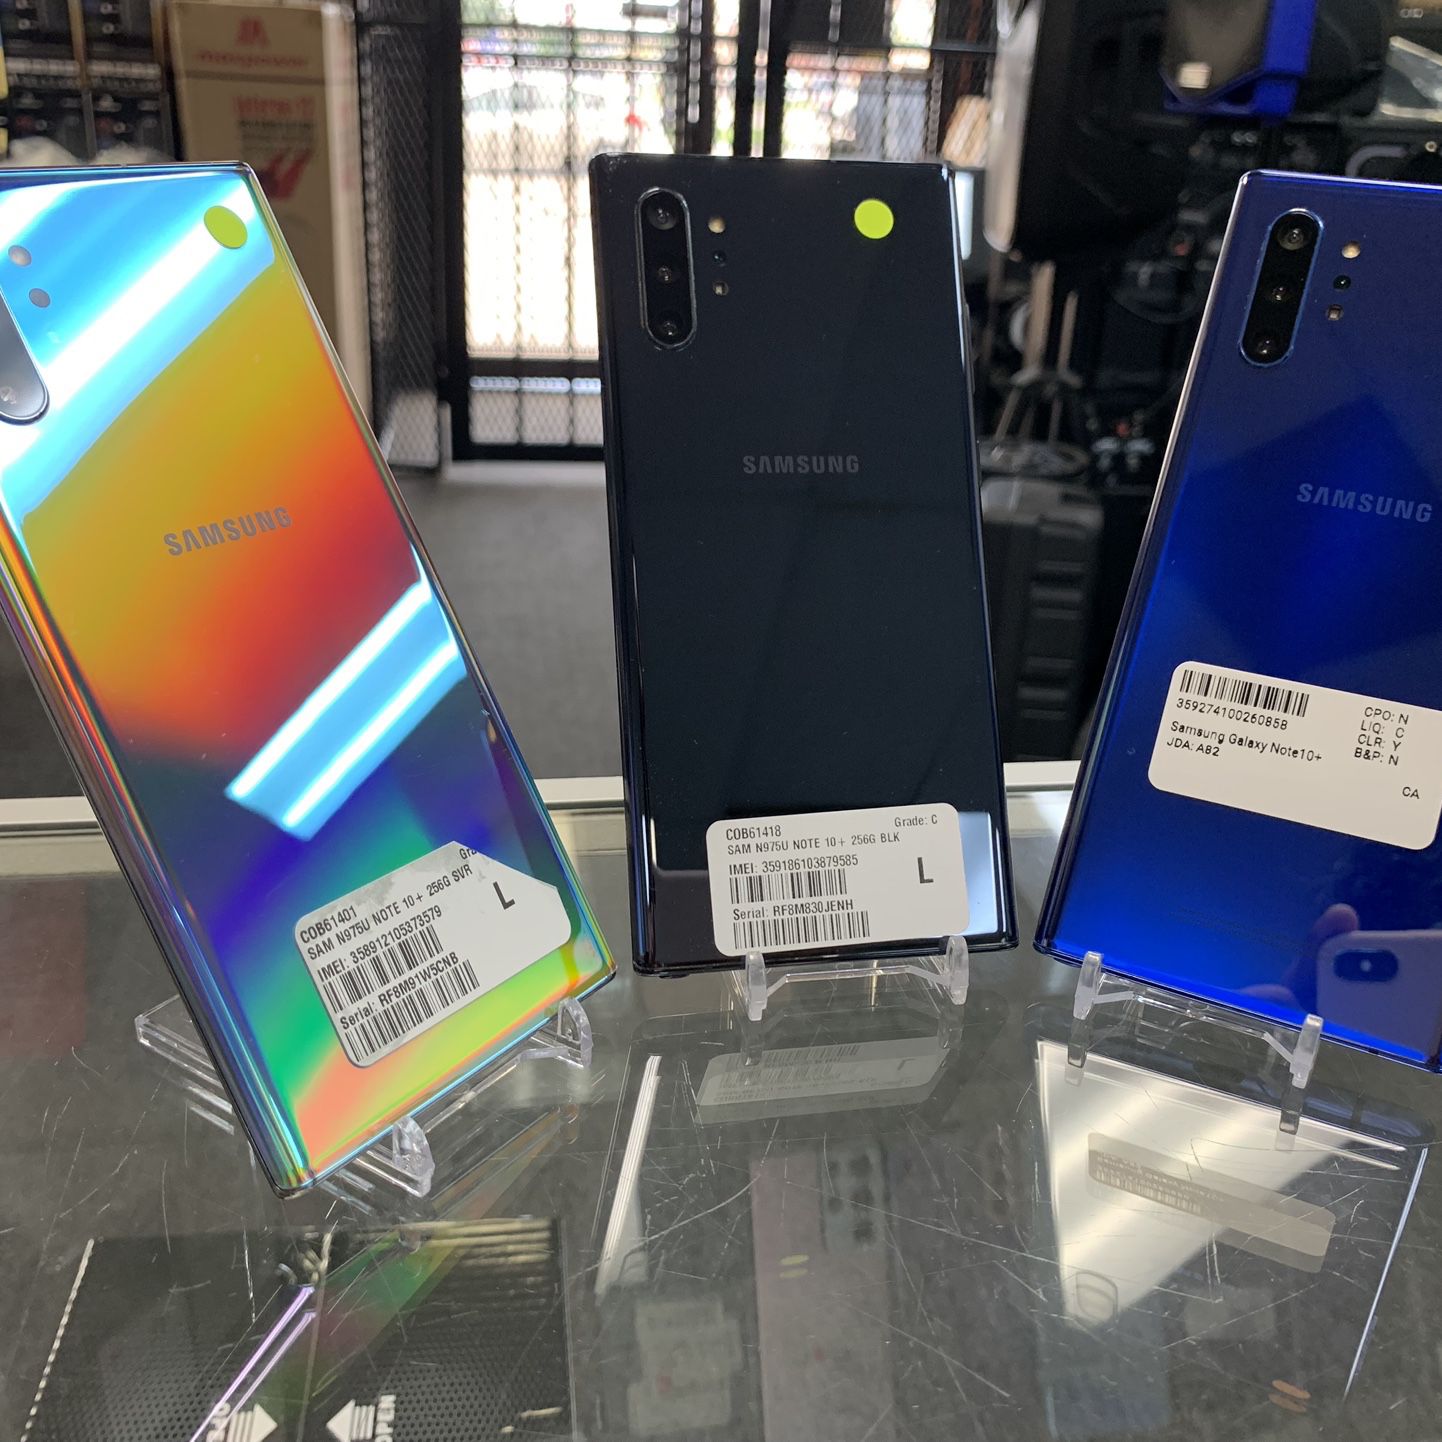 Samsung Galaxy Note 10 Plus 256gb Unlocked, Special Offers 